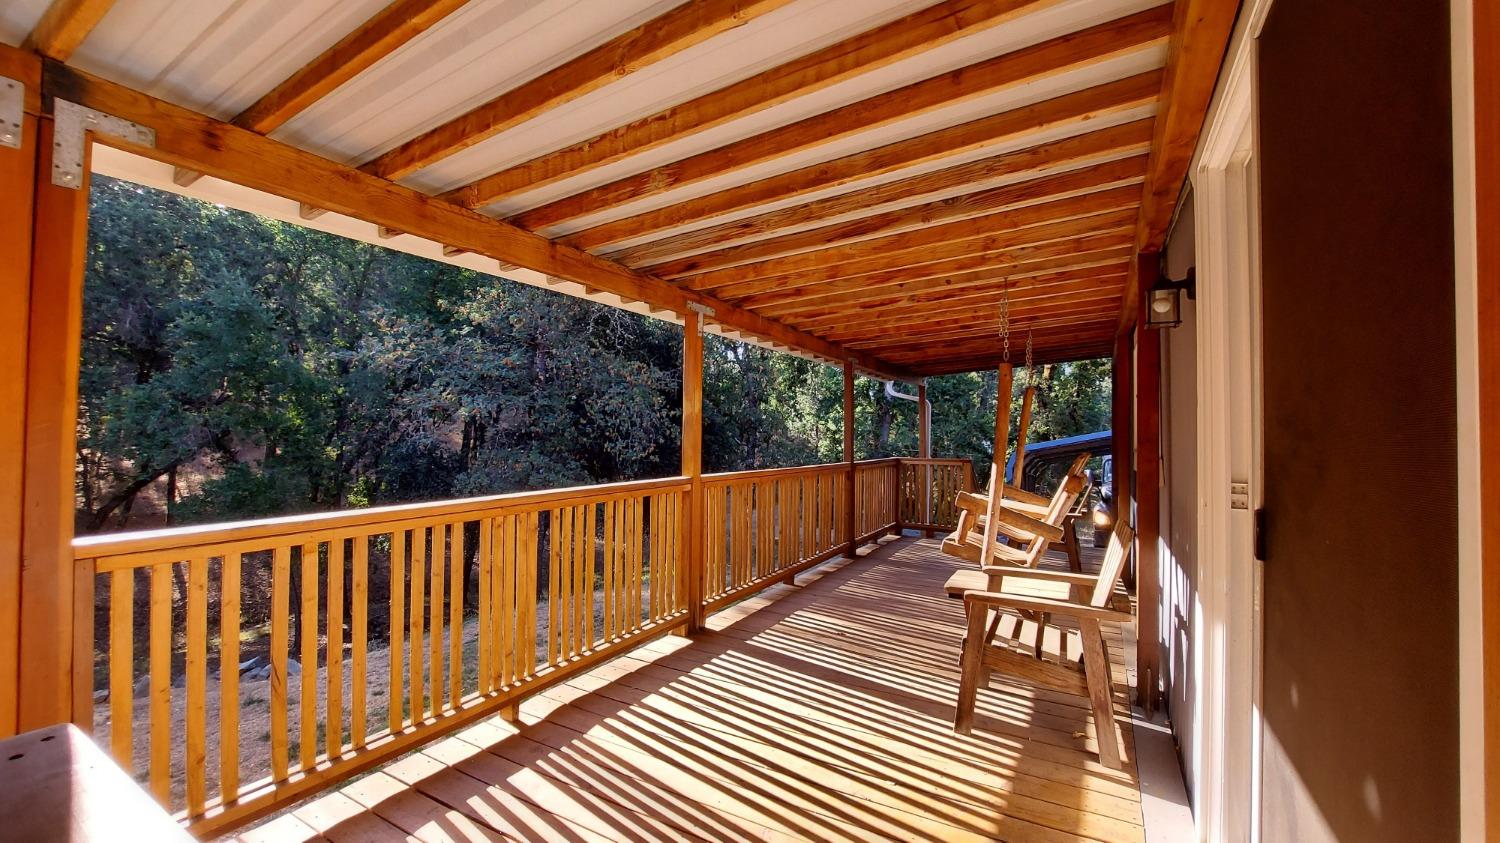 a view of balcony with wooden floor and outdoor space